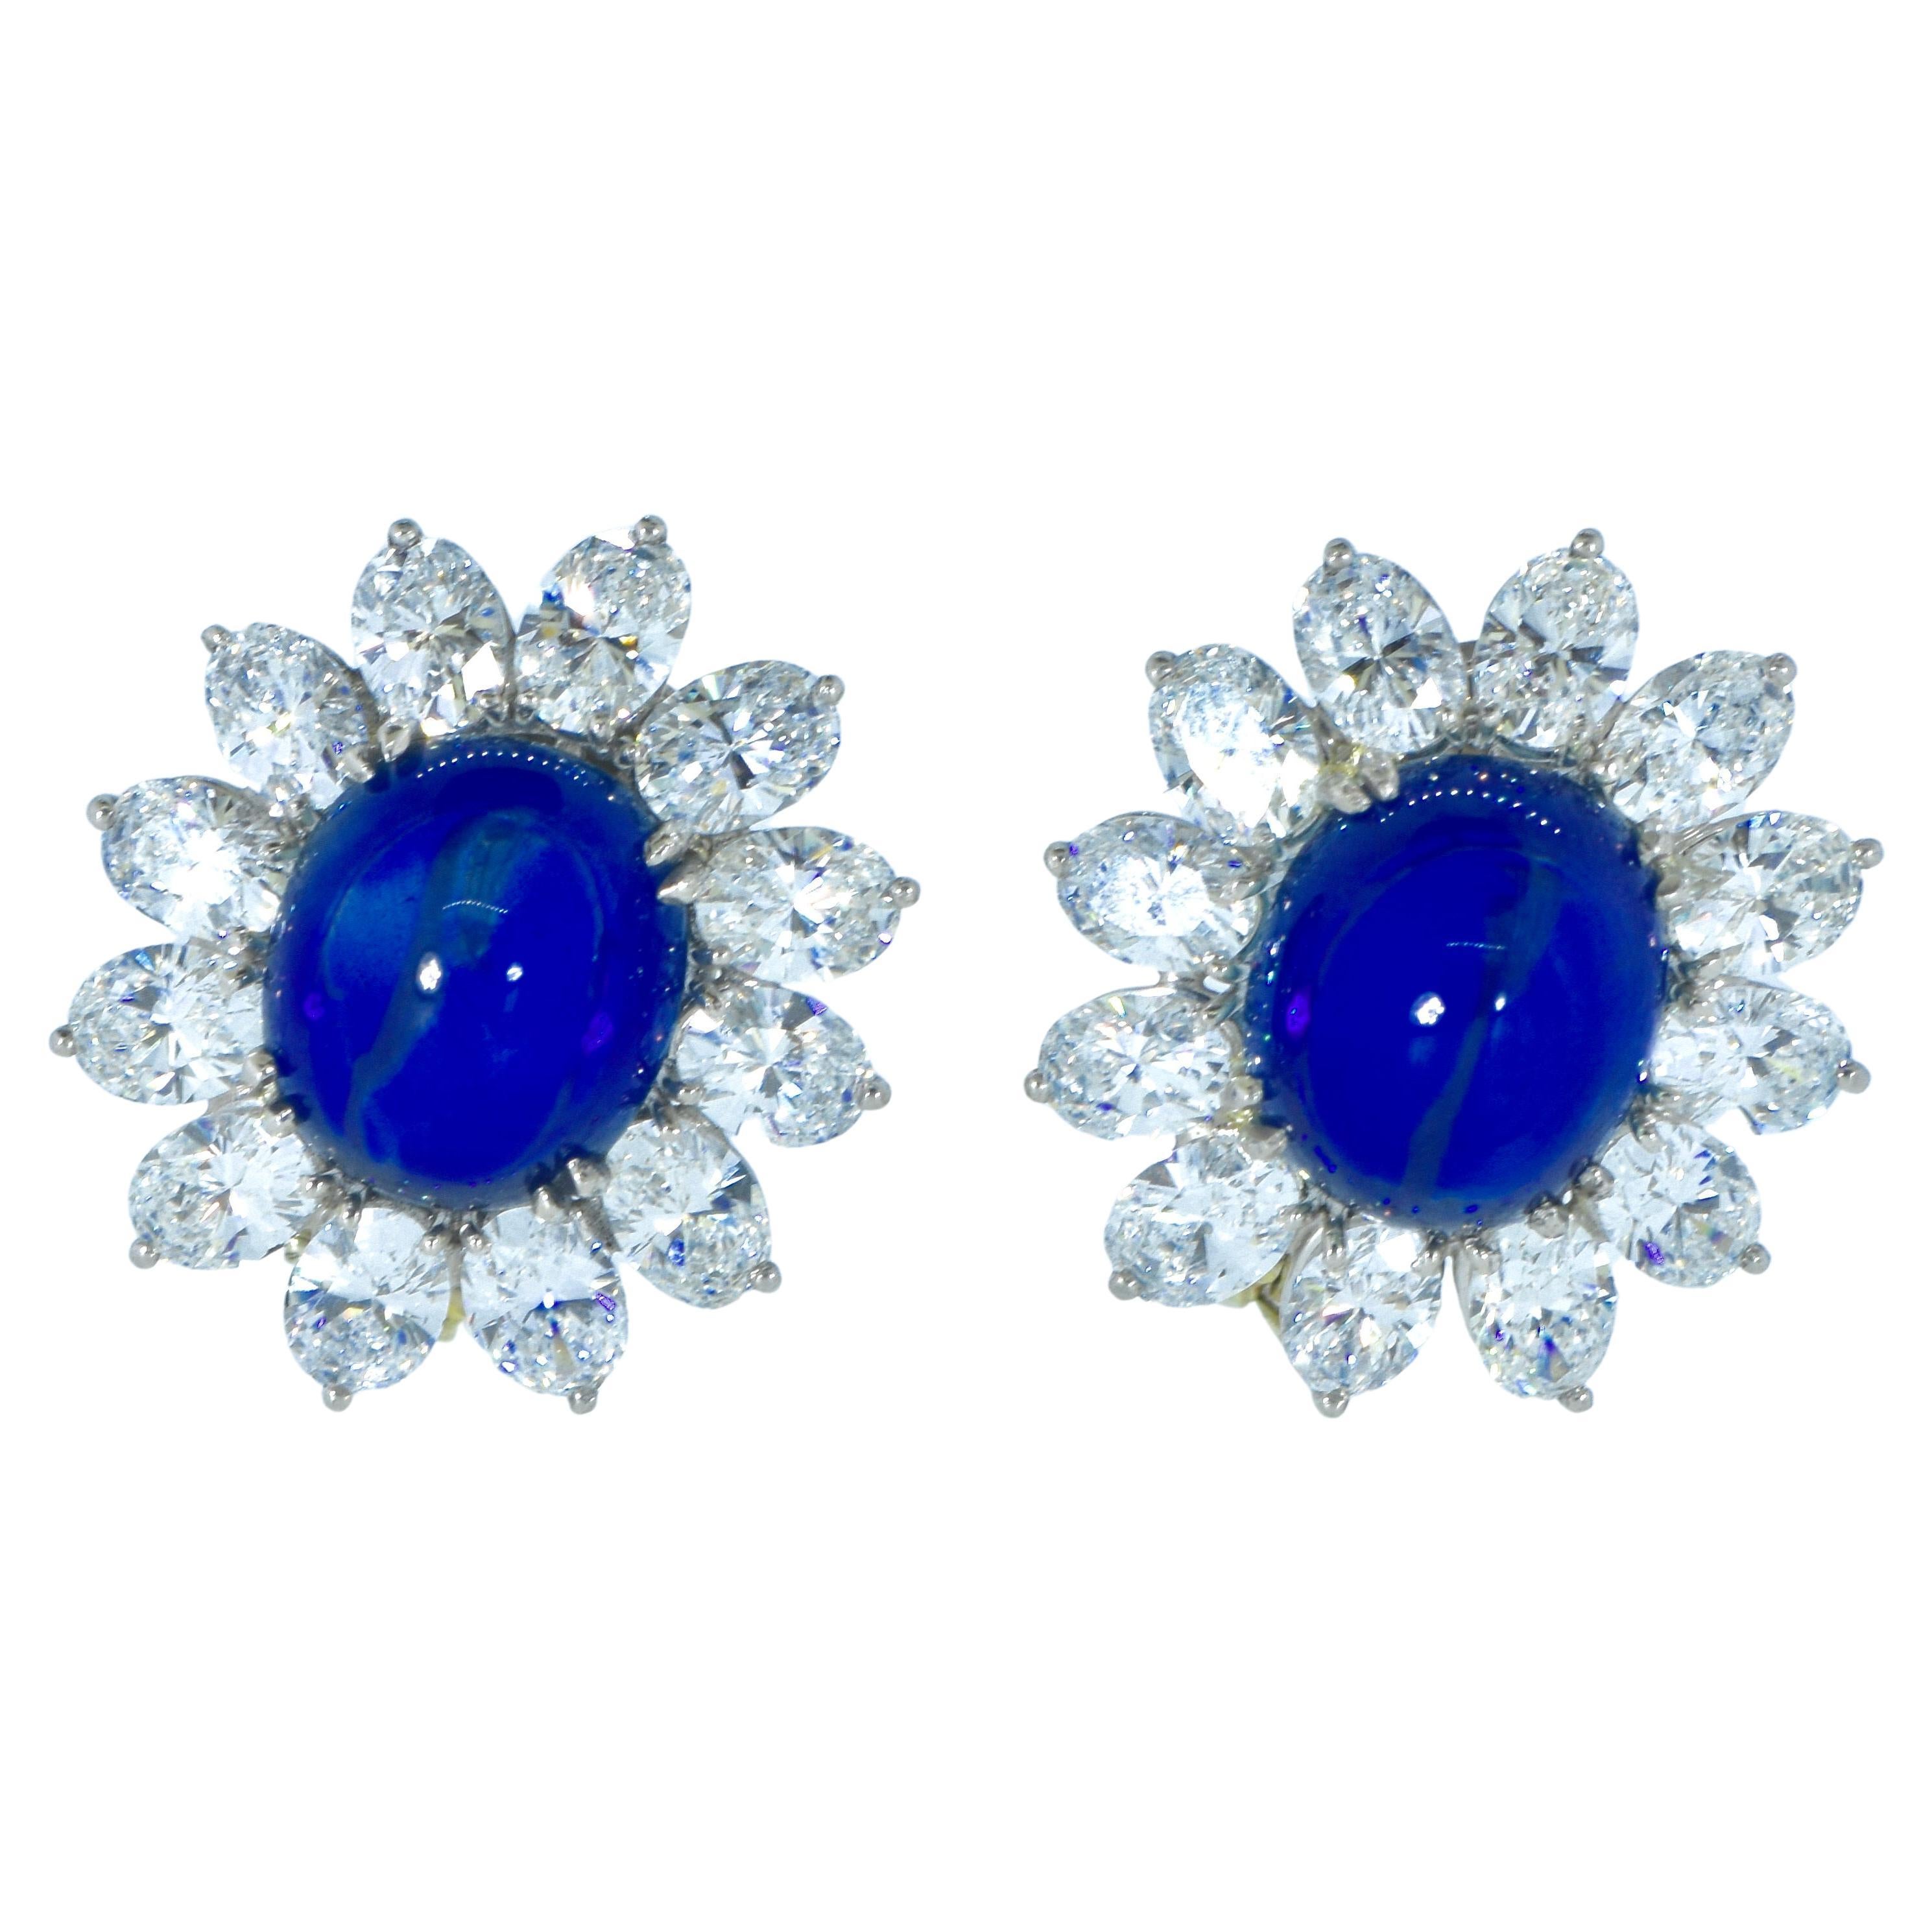  GIA certified natural sapphires, weighing exactly 9.67 cts., and 7.10 cts.,  are set off by fine white round brilliant cut diamonds.  The oval sapphires are a high cabochon cut, well matched, display a rich blue color and are very slightly